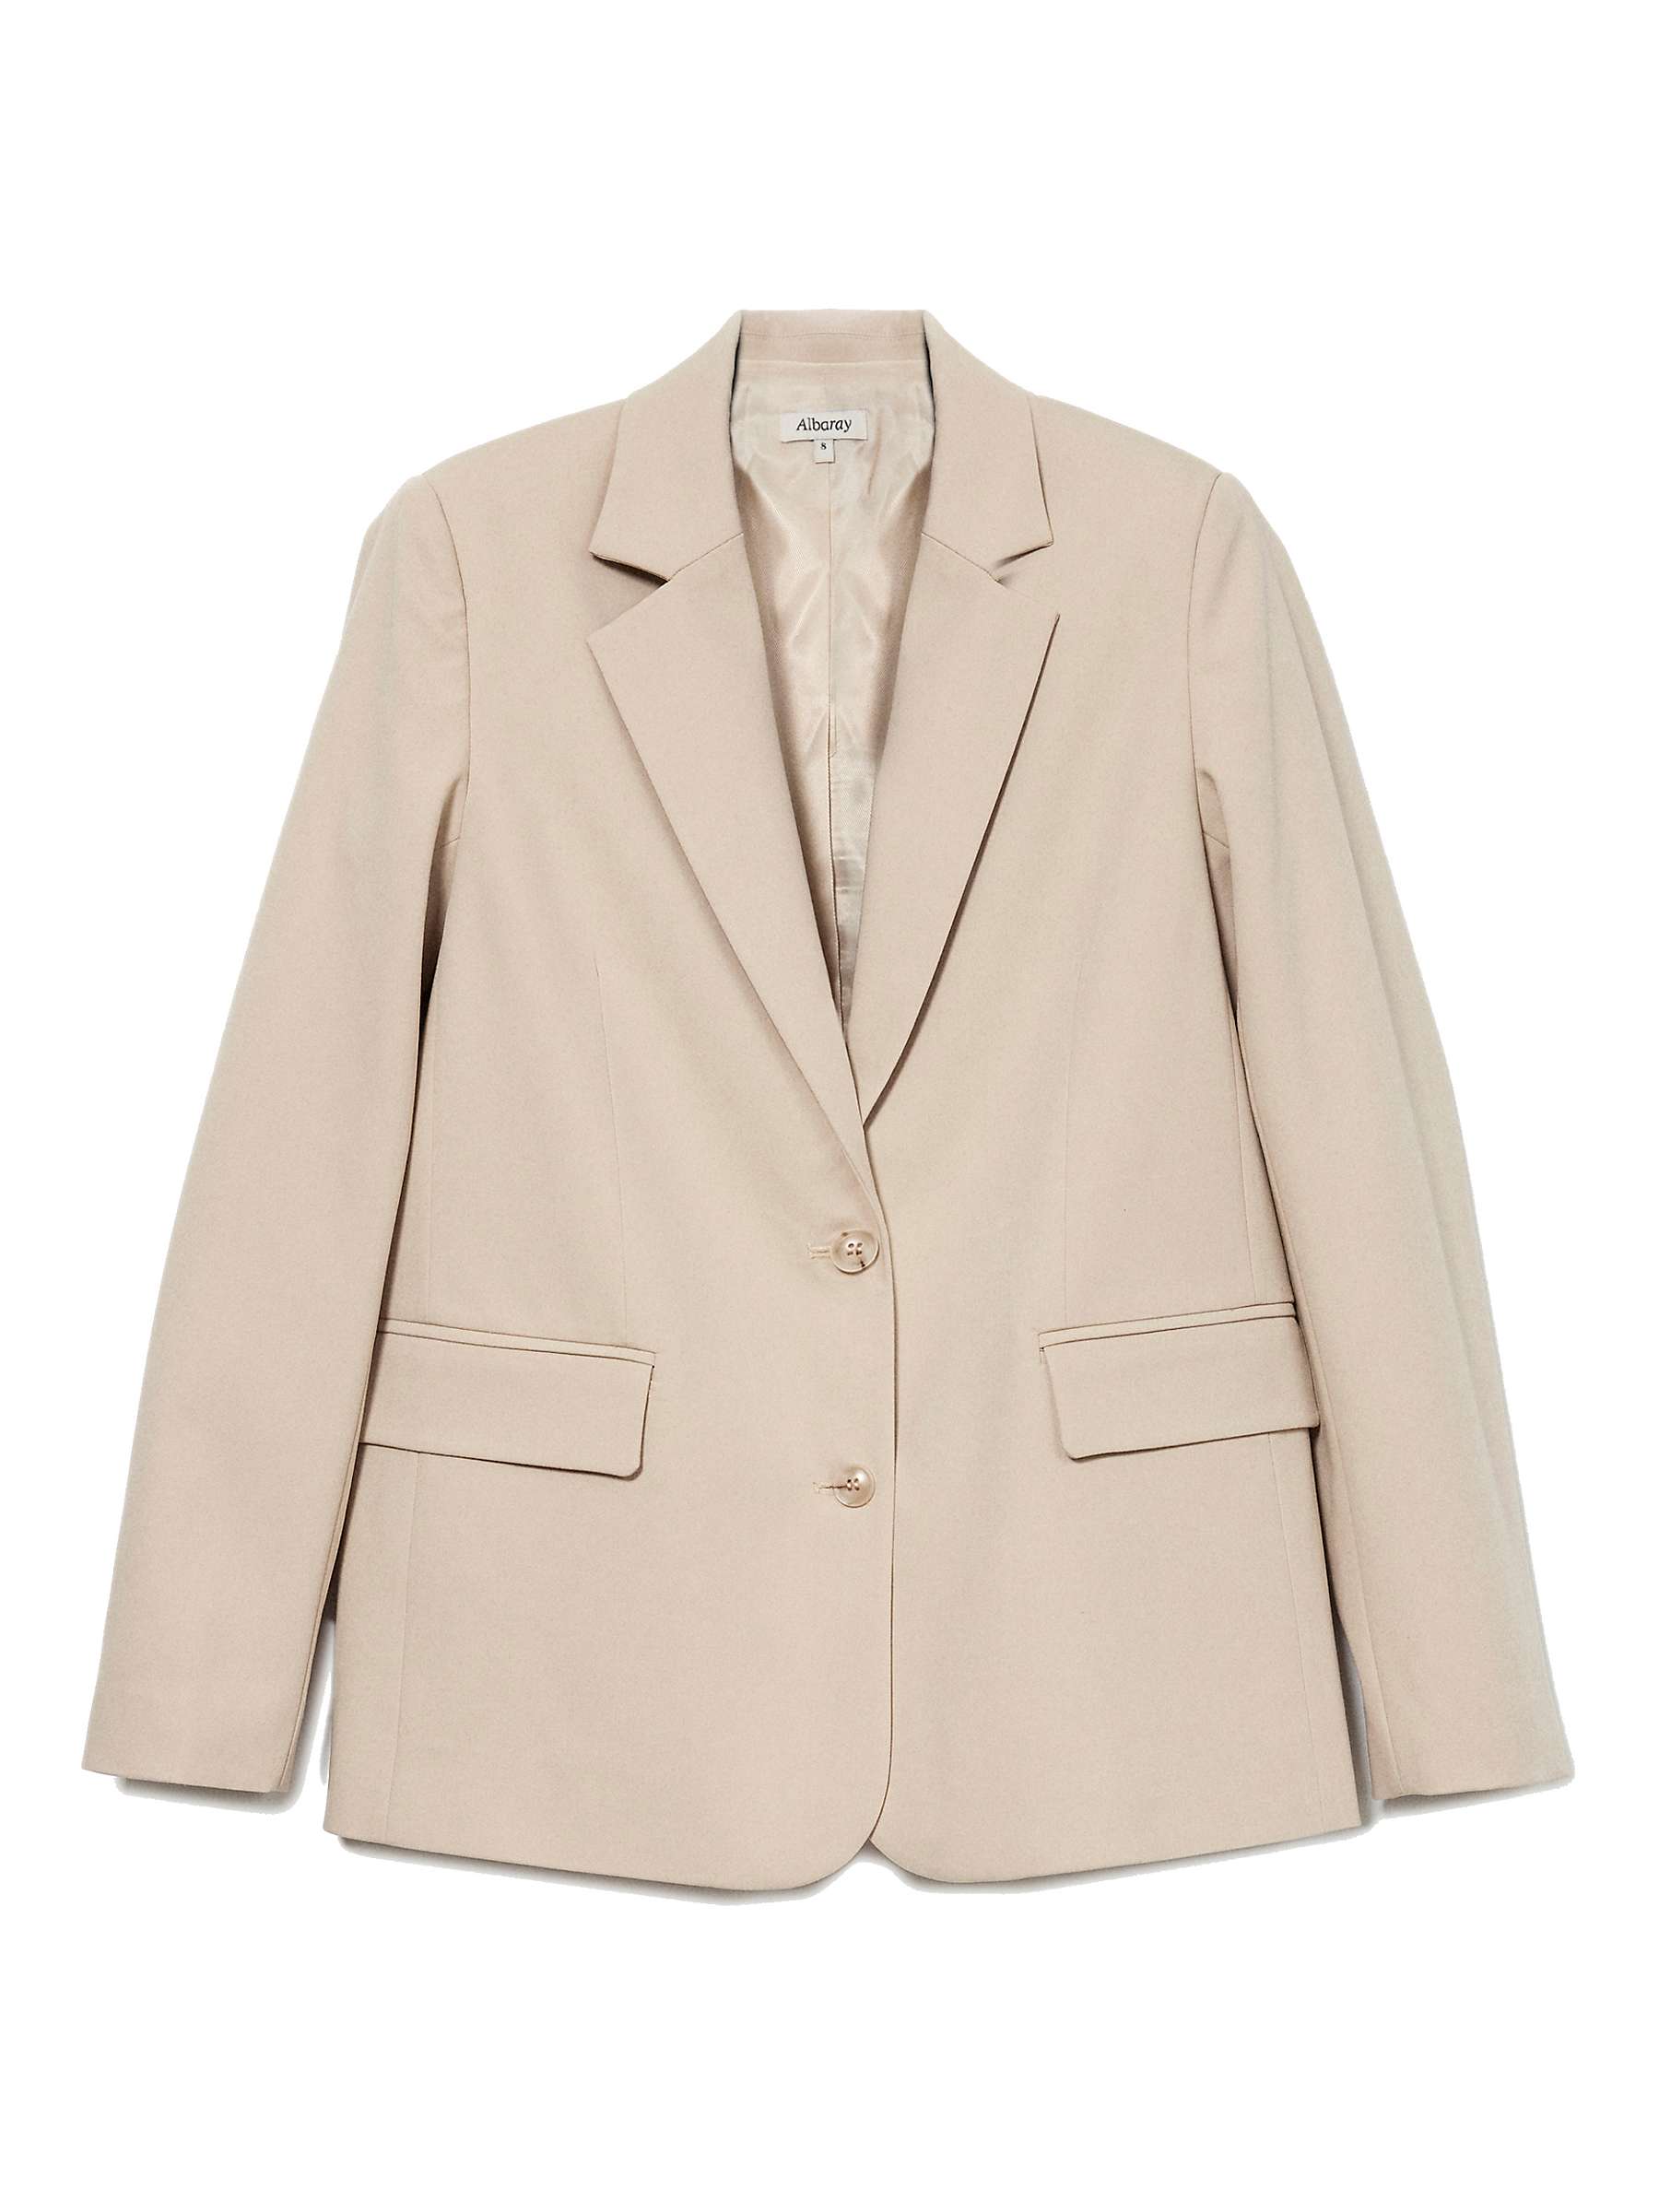 Buy Albaray Relaxed Fit Tailored Single Breasted Blazer, Stone Online at johnlewis.com